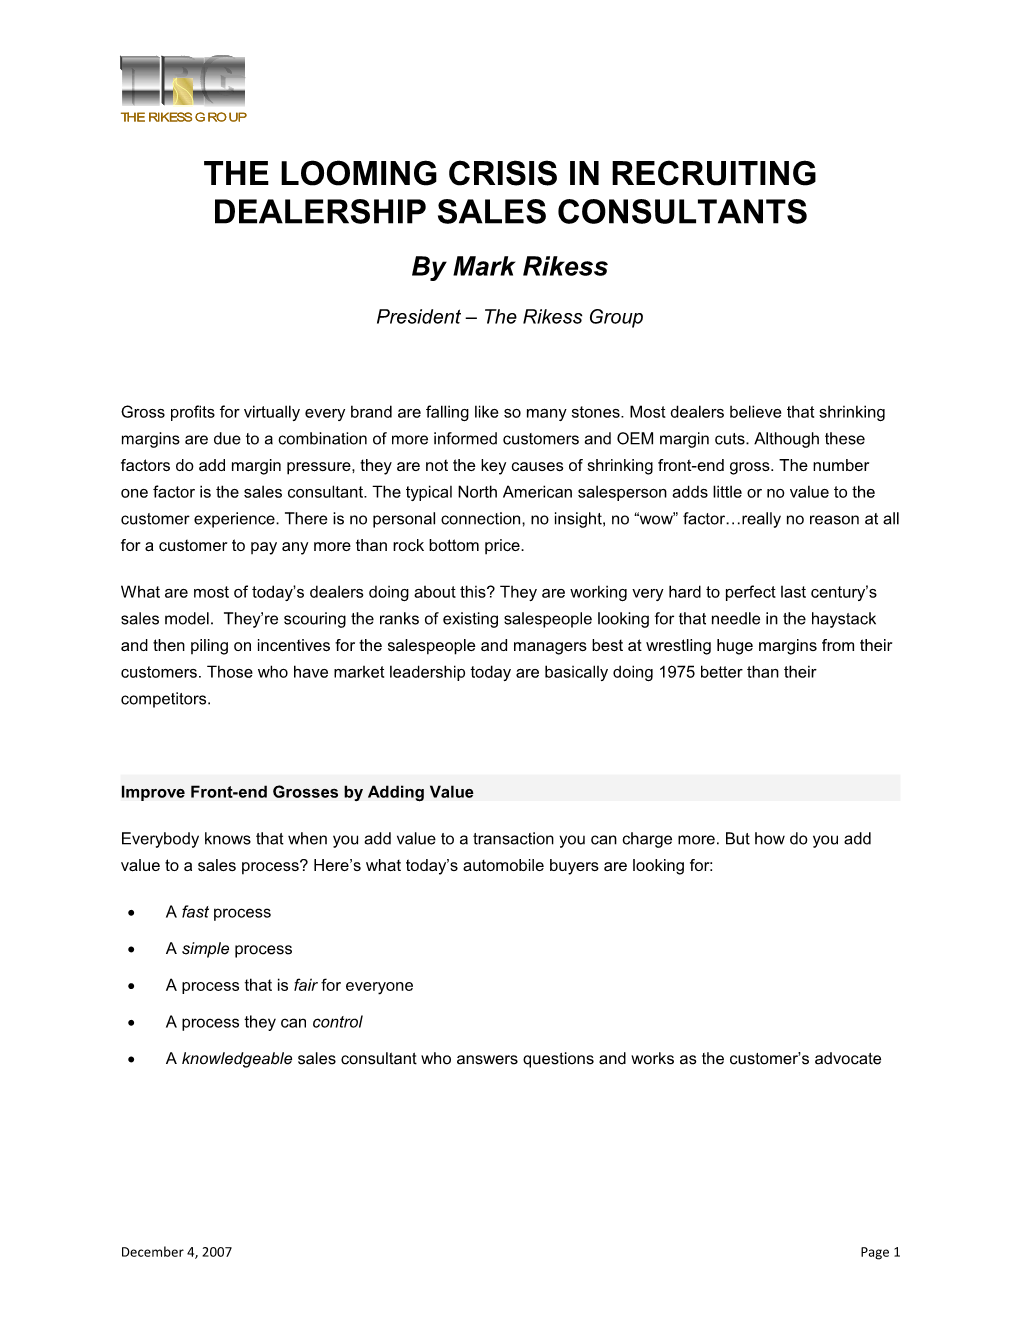 The Looming Auto Sales Consultant Recruiting Crisis